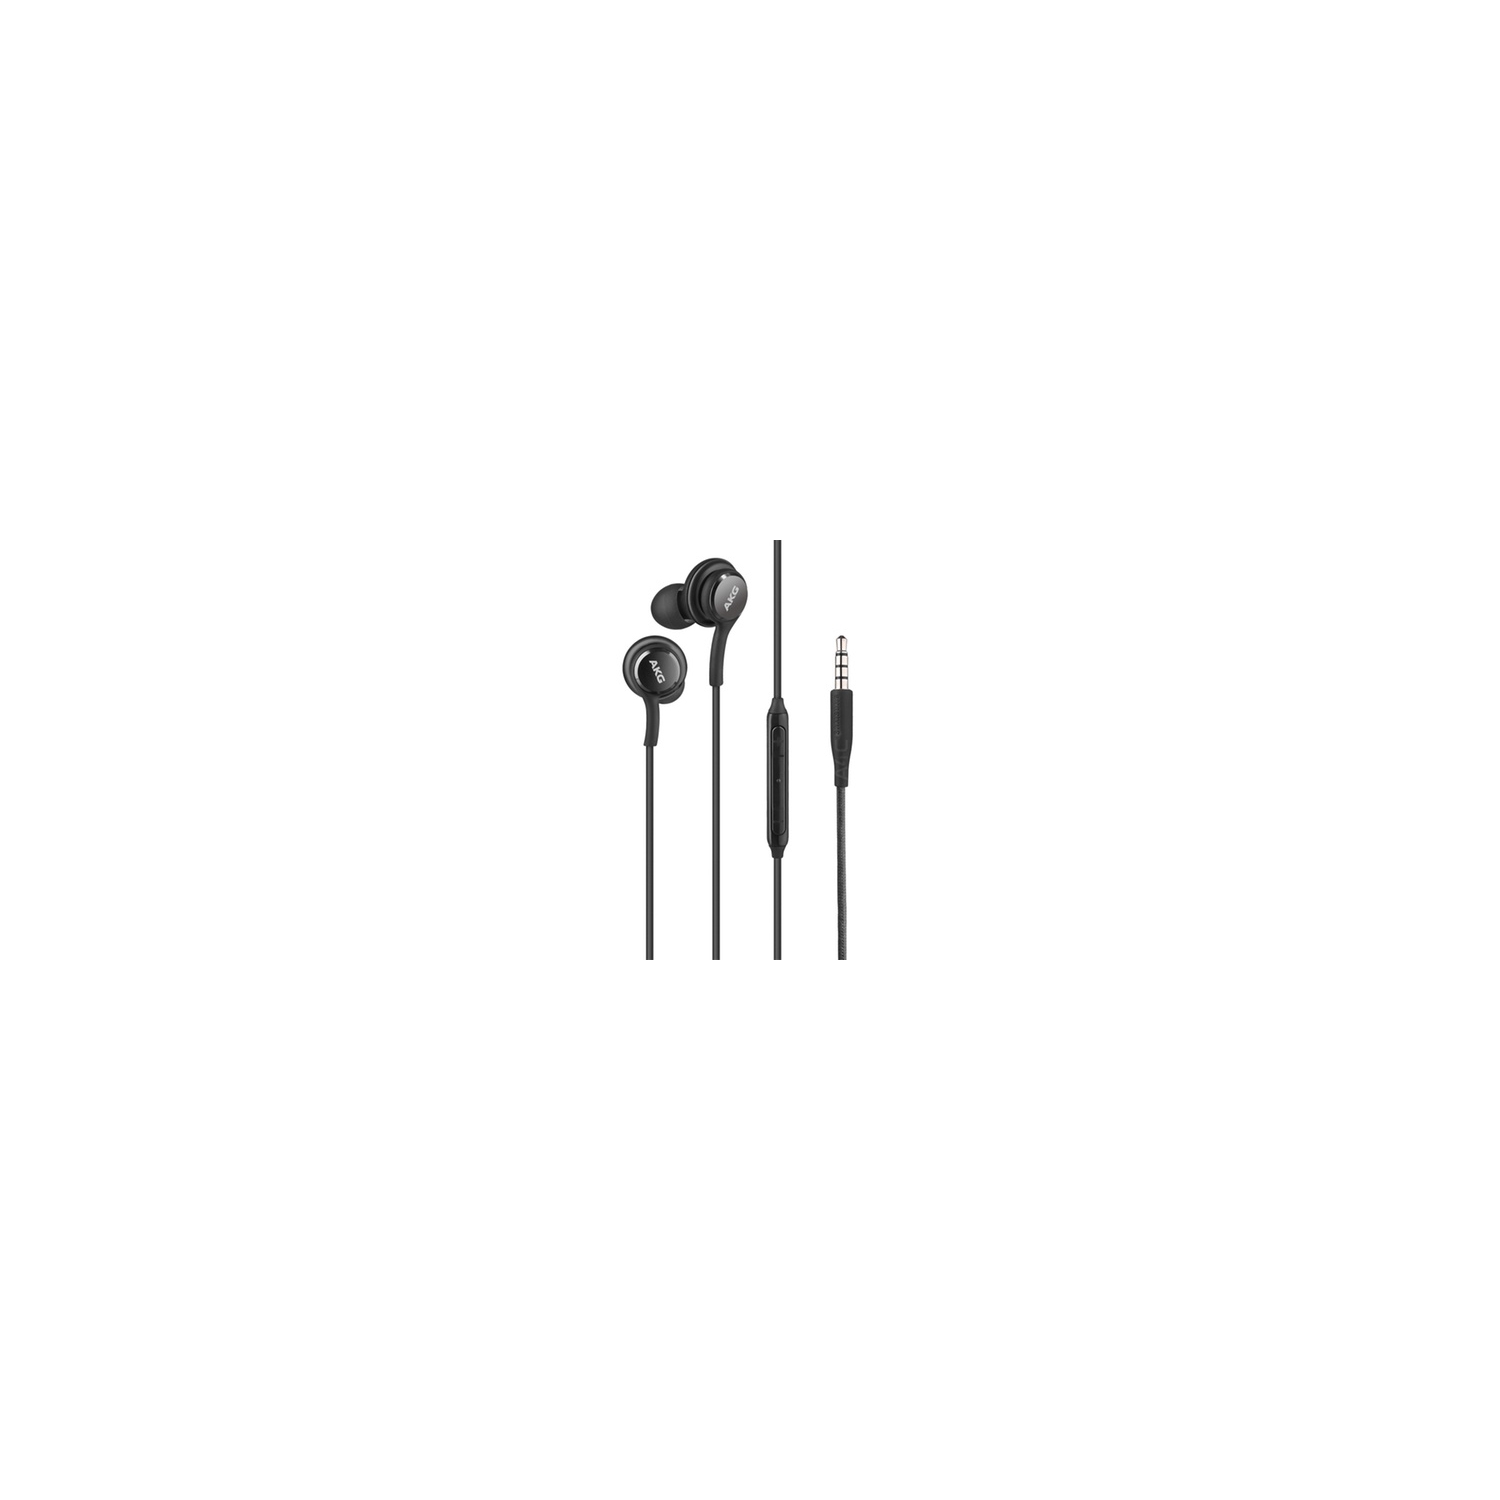 Samsung AKG In-Ear Wired Headphones Headset EO-IG955 3.5mm Black for Galaxy S8 S8+ NEW